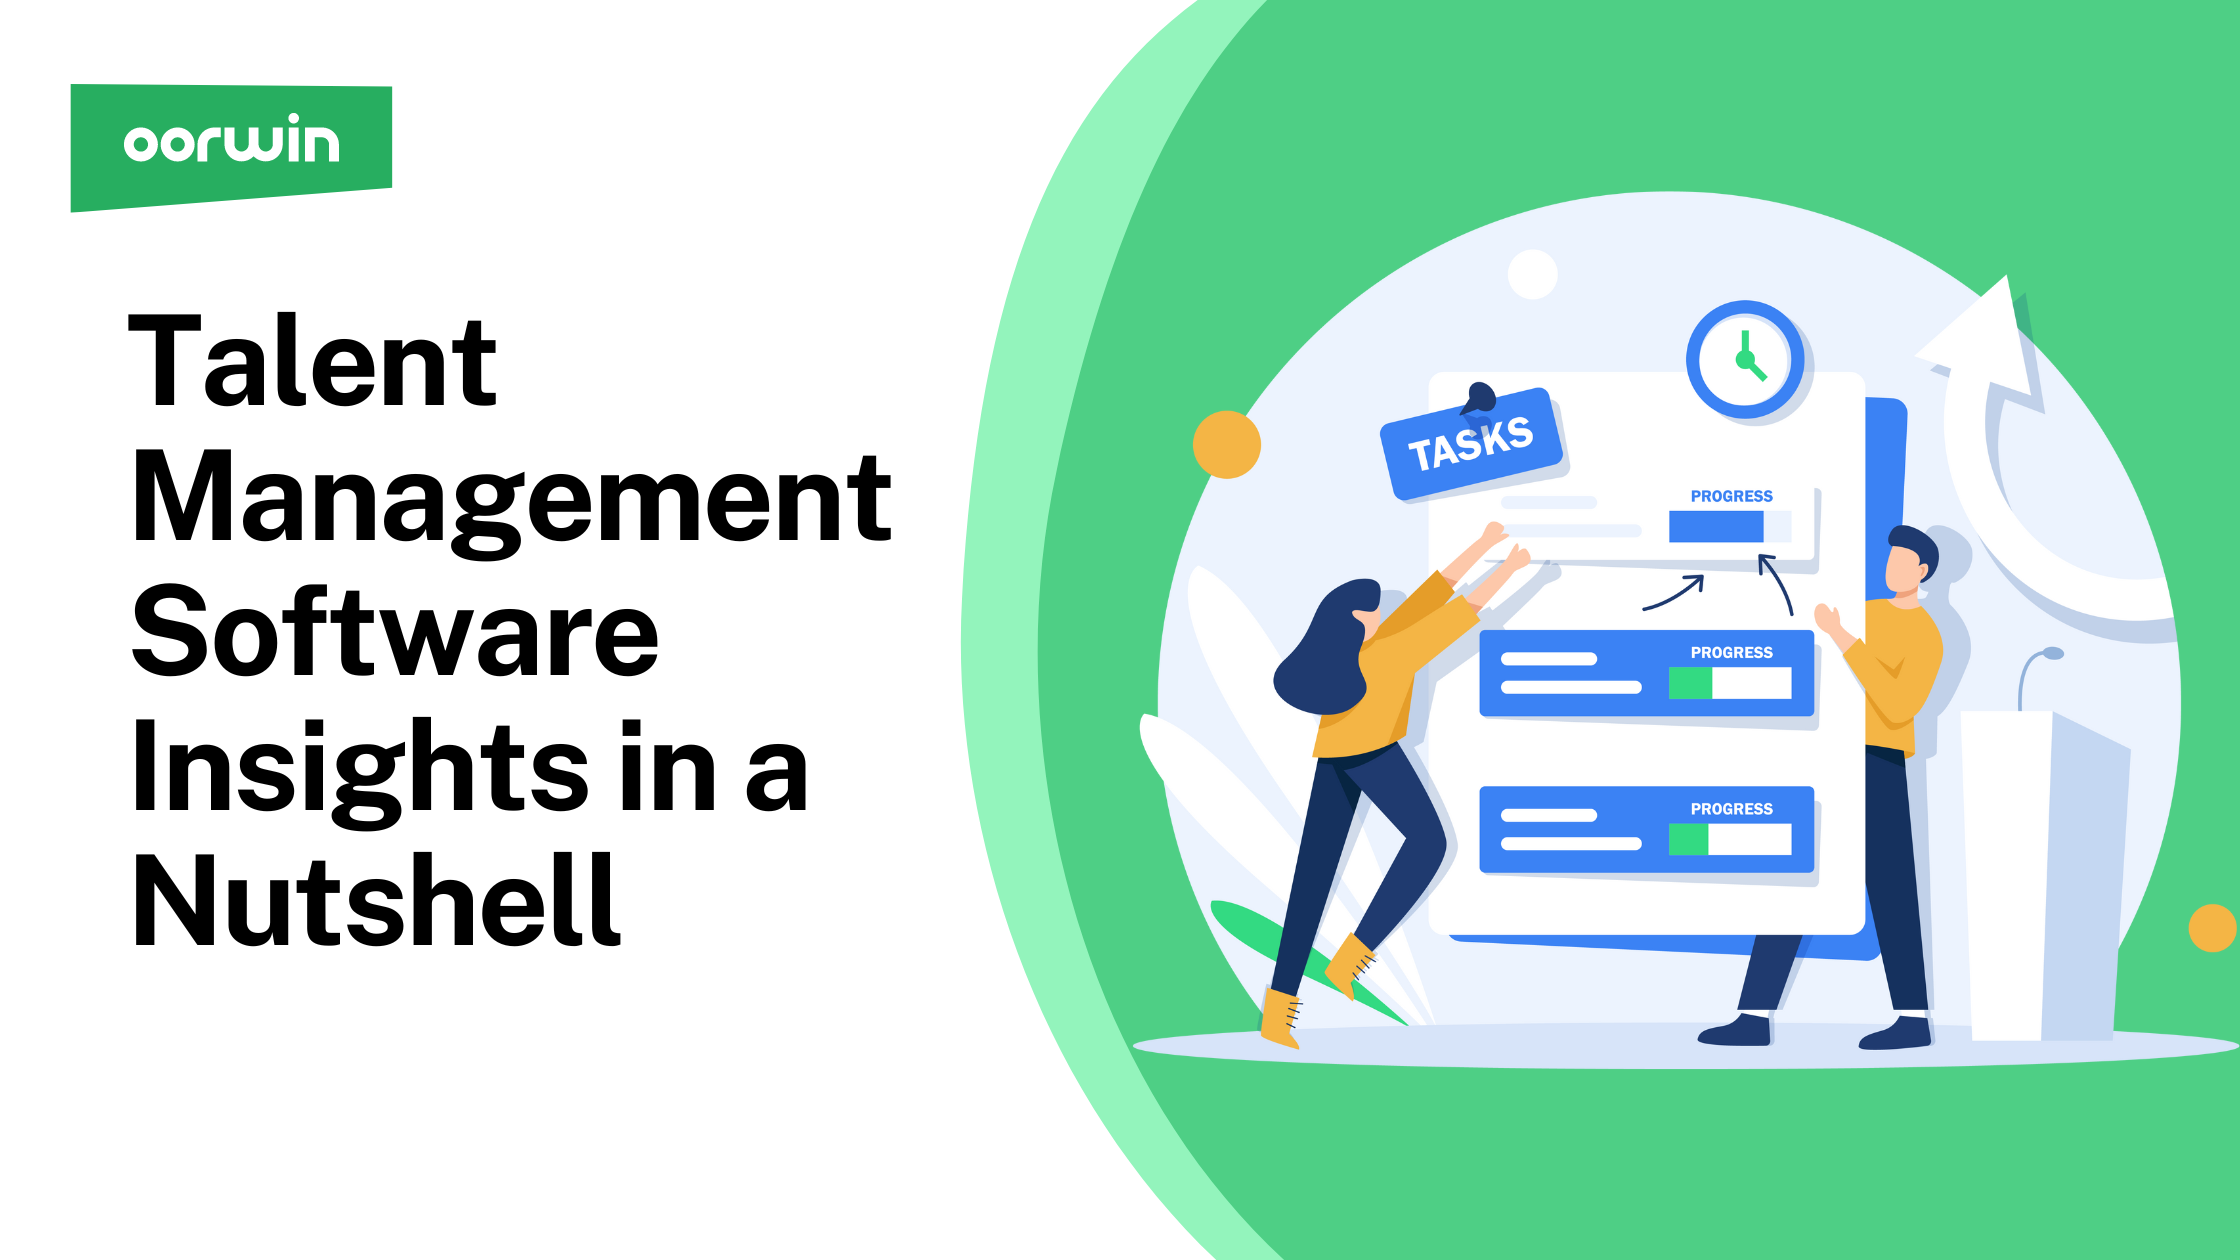 Talent Management Software Insights in a Nutshell